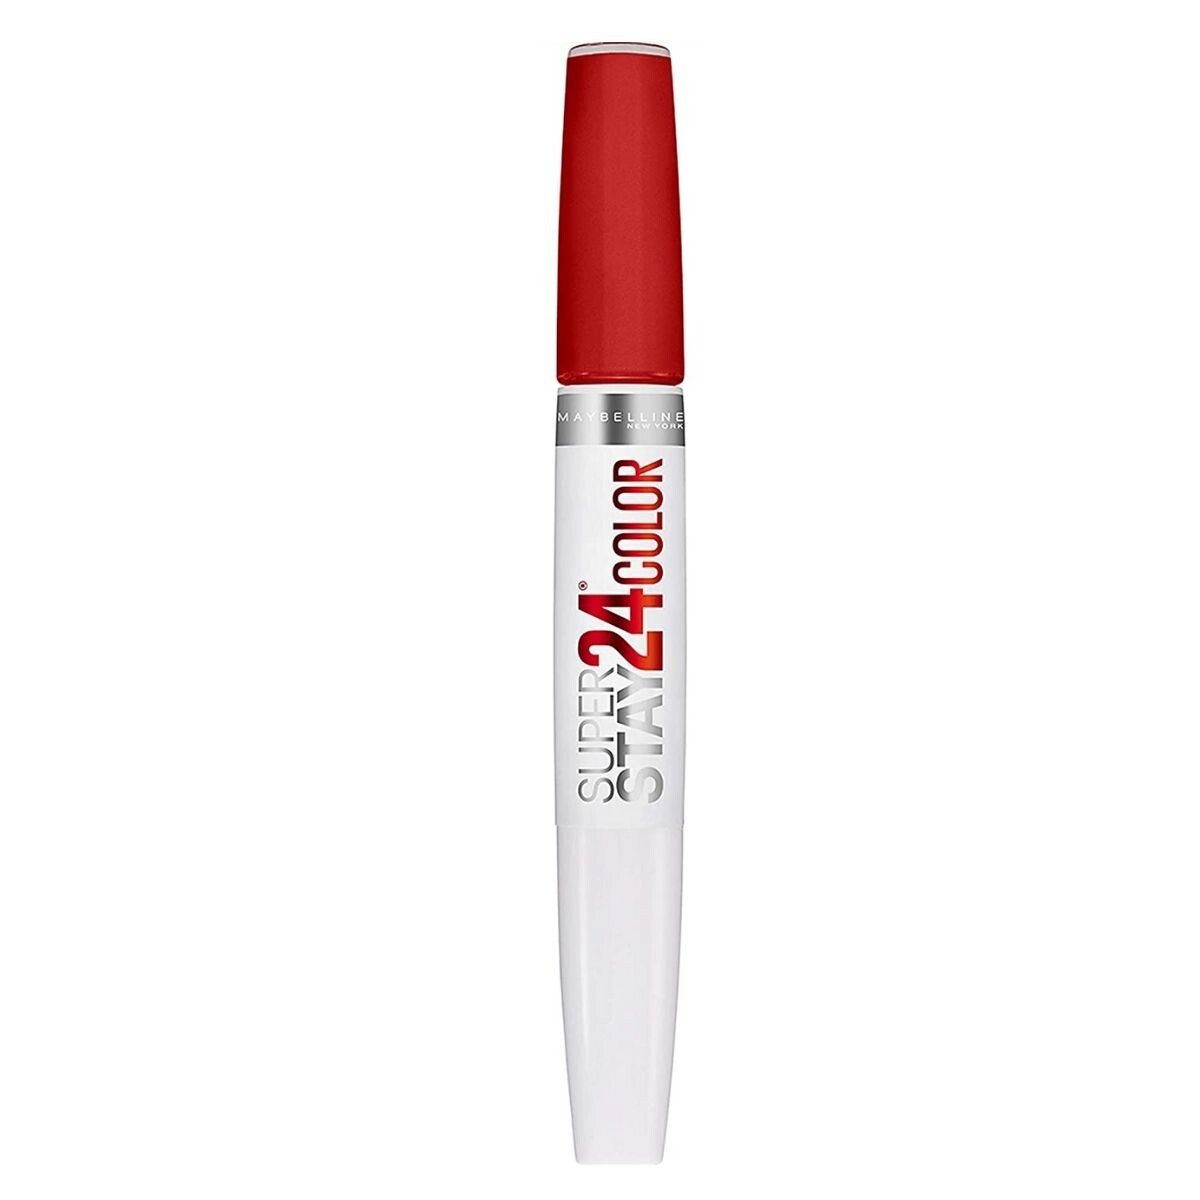 Labial Larga Duración Maybelline SuperStay 24 Smille - Keep It Red 